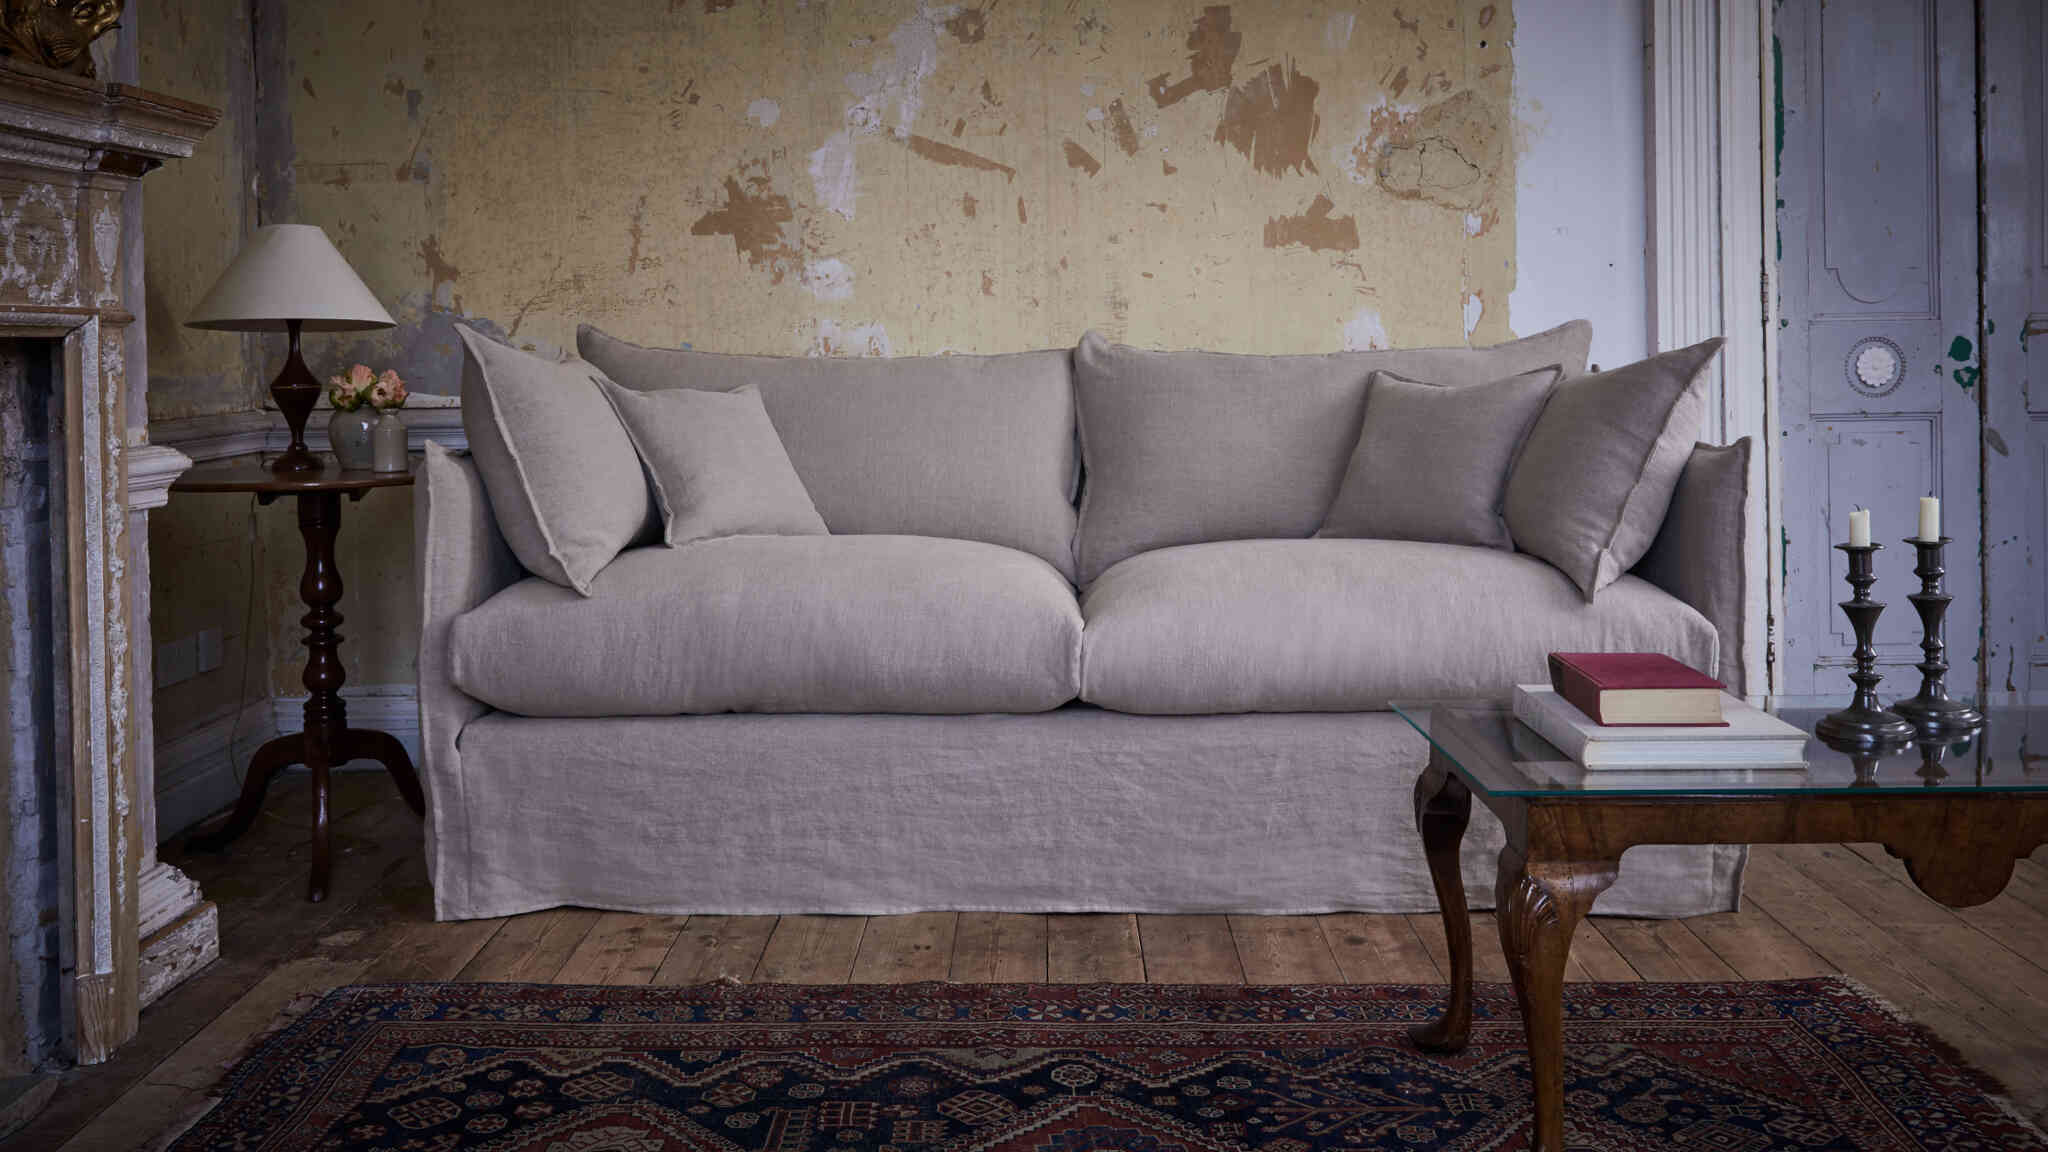 Know How: How to care for linen upholstery